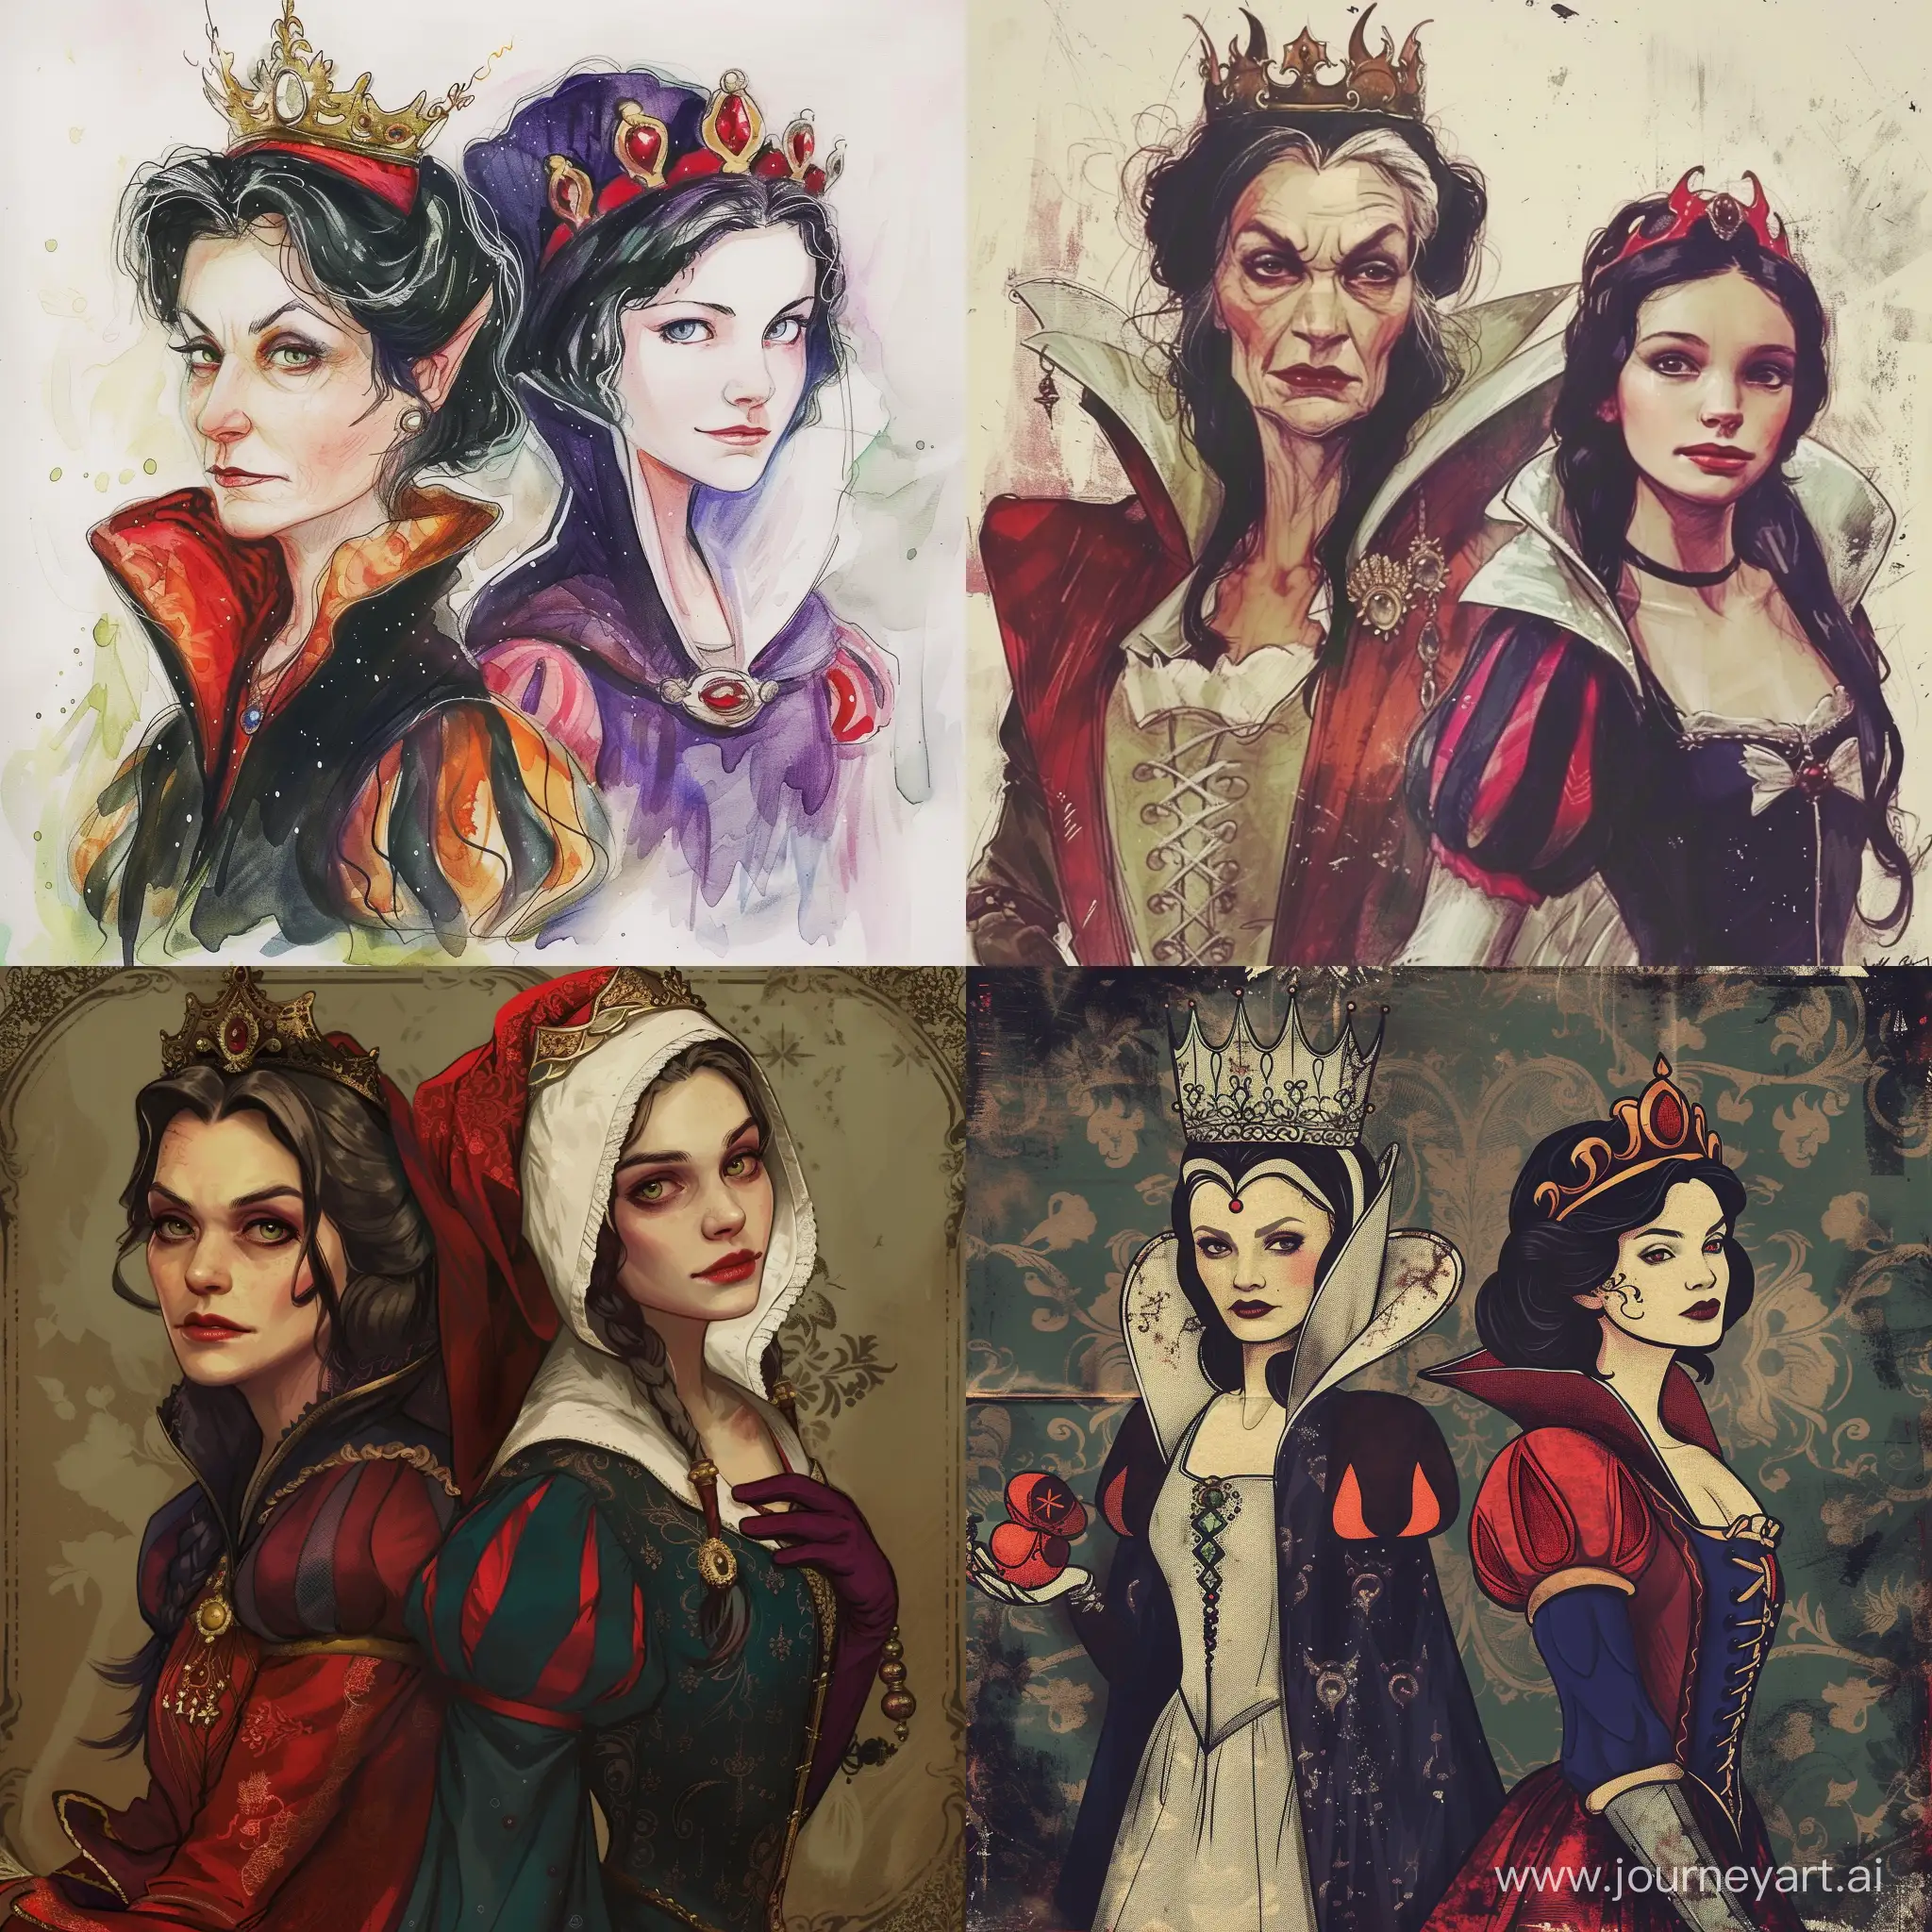 Draw the Evil Queen as the protagonist and Snow White as the antagonist.